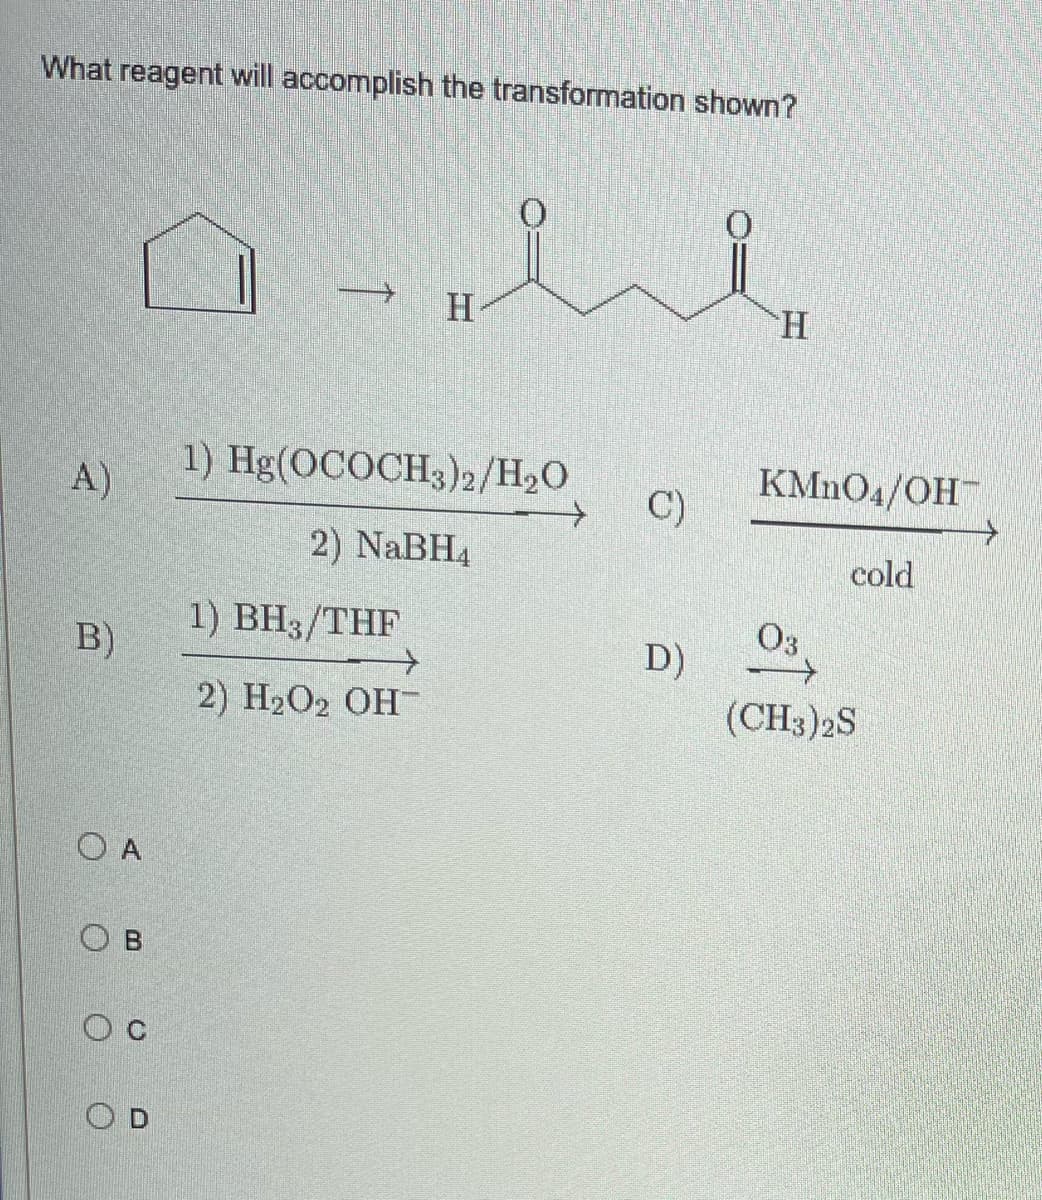 What reagent will accomplish the transformation shown?
H
H
1) Hg(OCOCH3)2/H₂O
KMnO4/OH™
A)
2) NaBH4
cold
1) BH3/THF
03
2) H₂O₂ OH-
(CH3)2S
B)
O A
Ов
Ос
OD
C)
D)